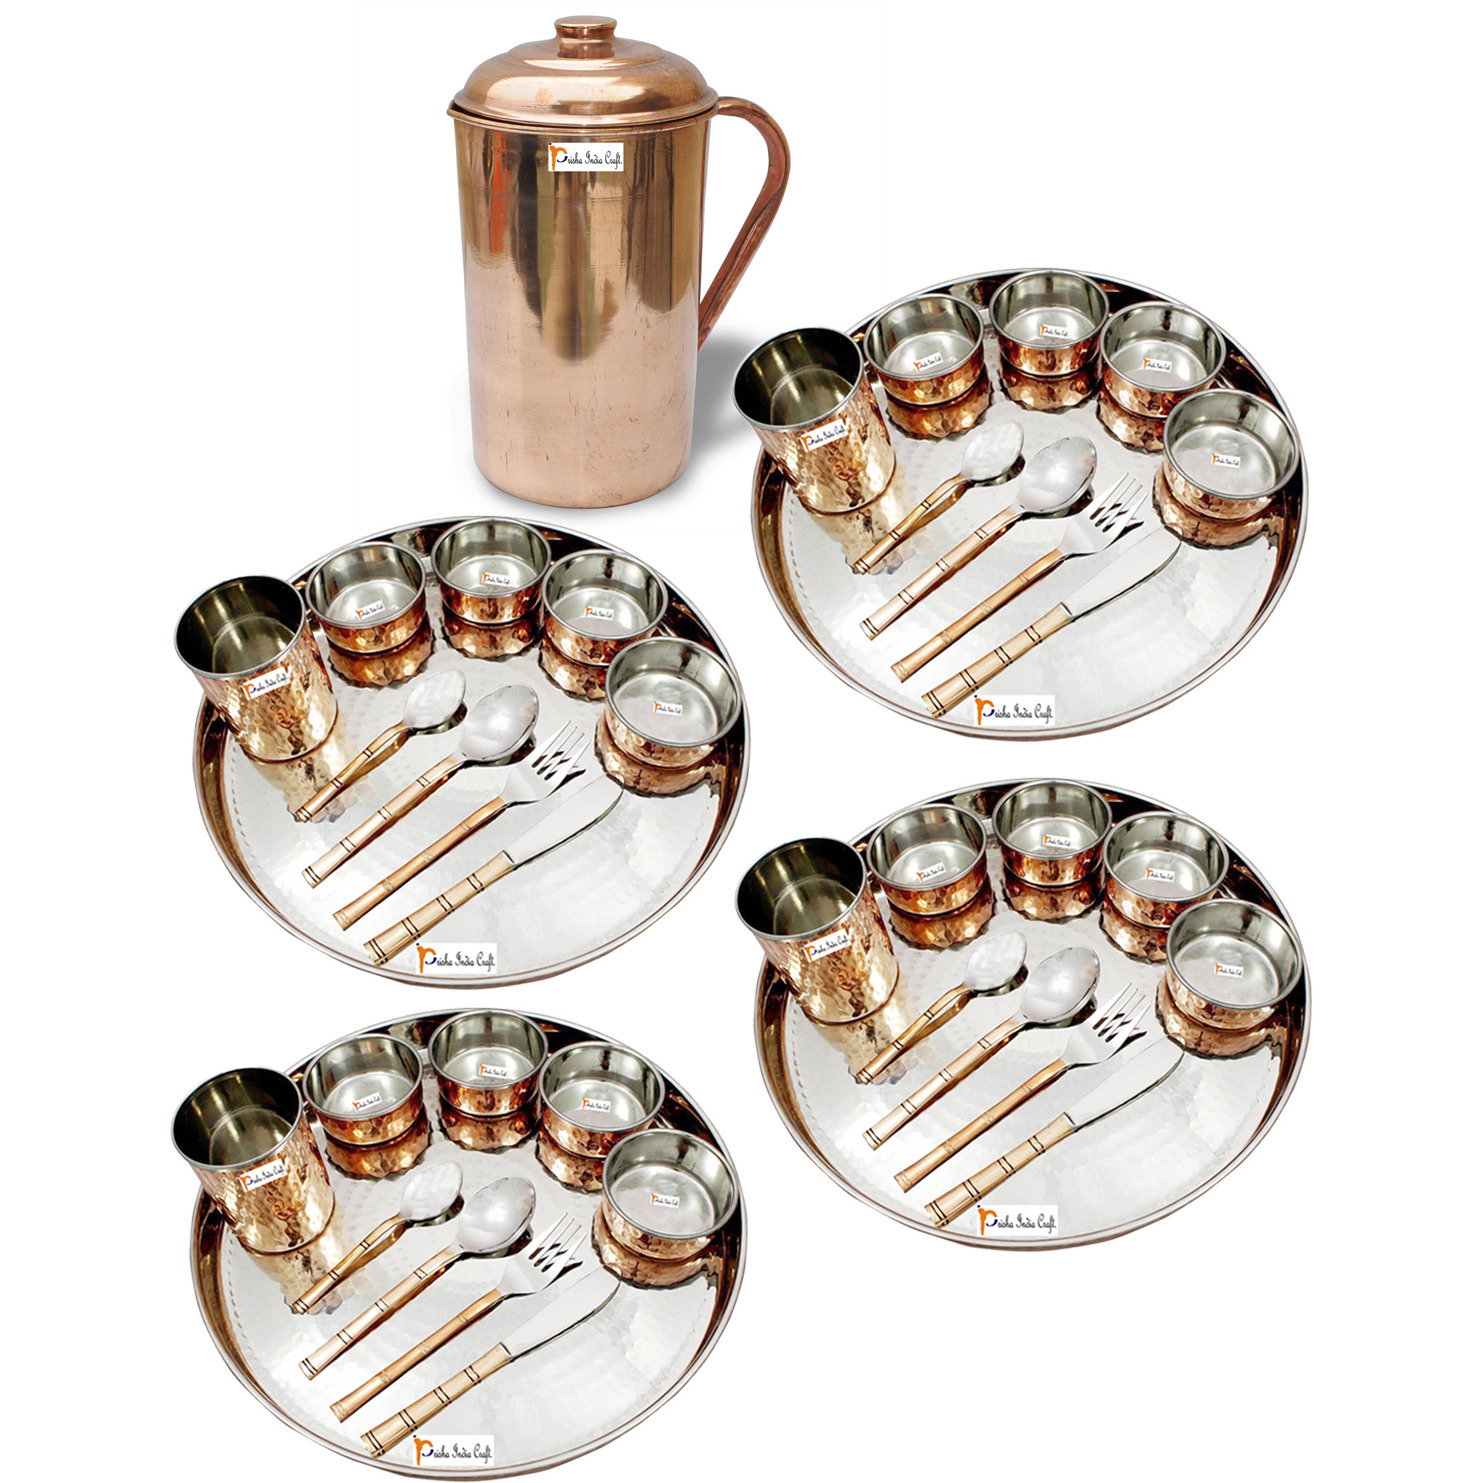 Prisha India Craft B. Set of 4 Dinnerware Traditional Stainless Steel Copper Dinner Set of Thali Plate, Bowls, Glass and Spoons, Dia 13  With 1 Pure Copper Pitcher Jug - Christmas Gift